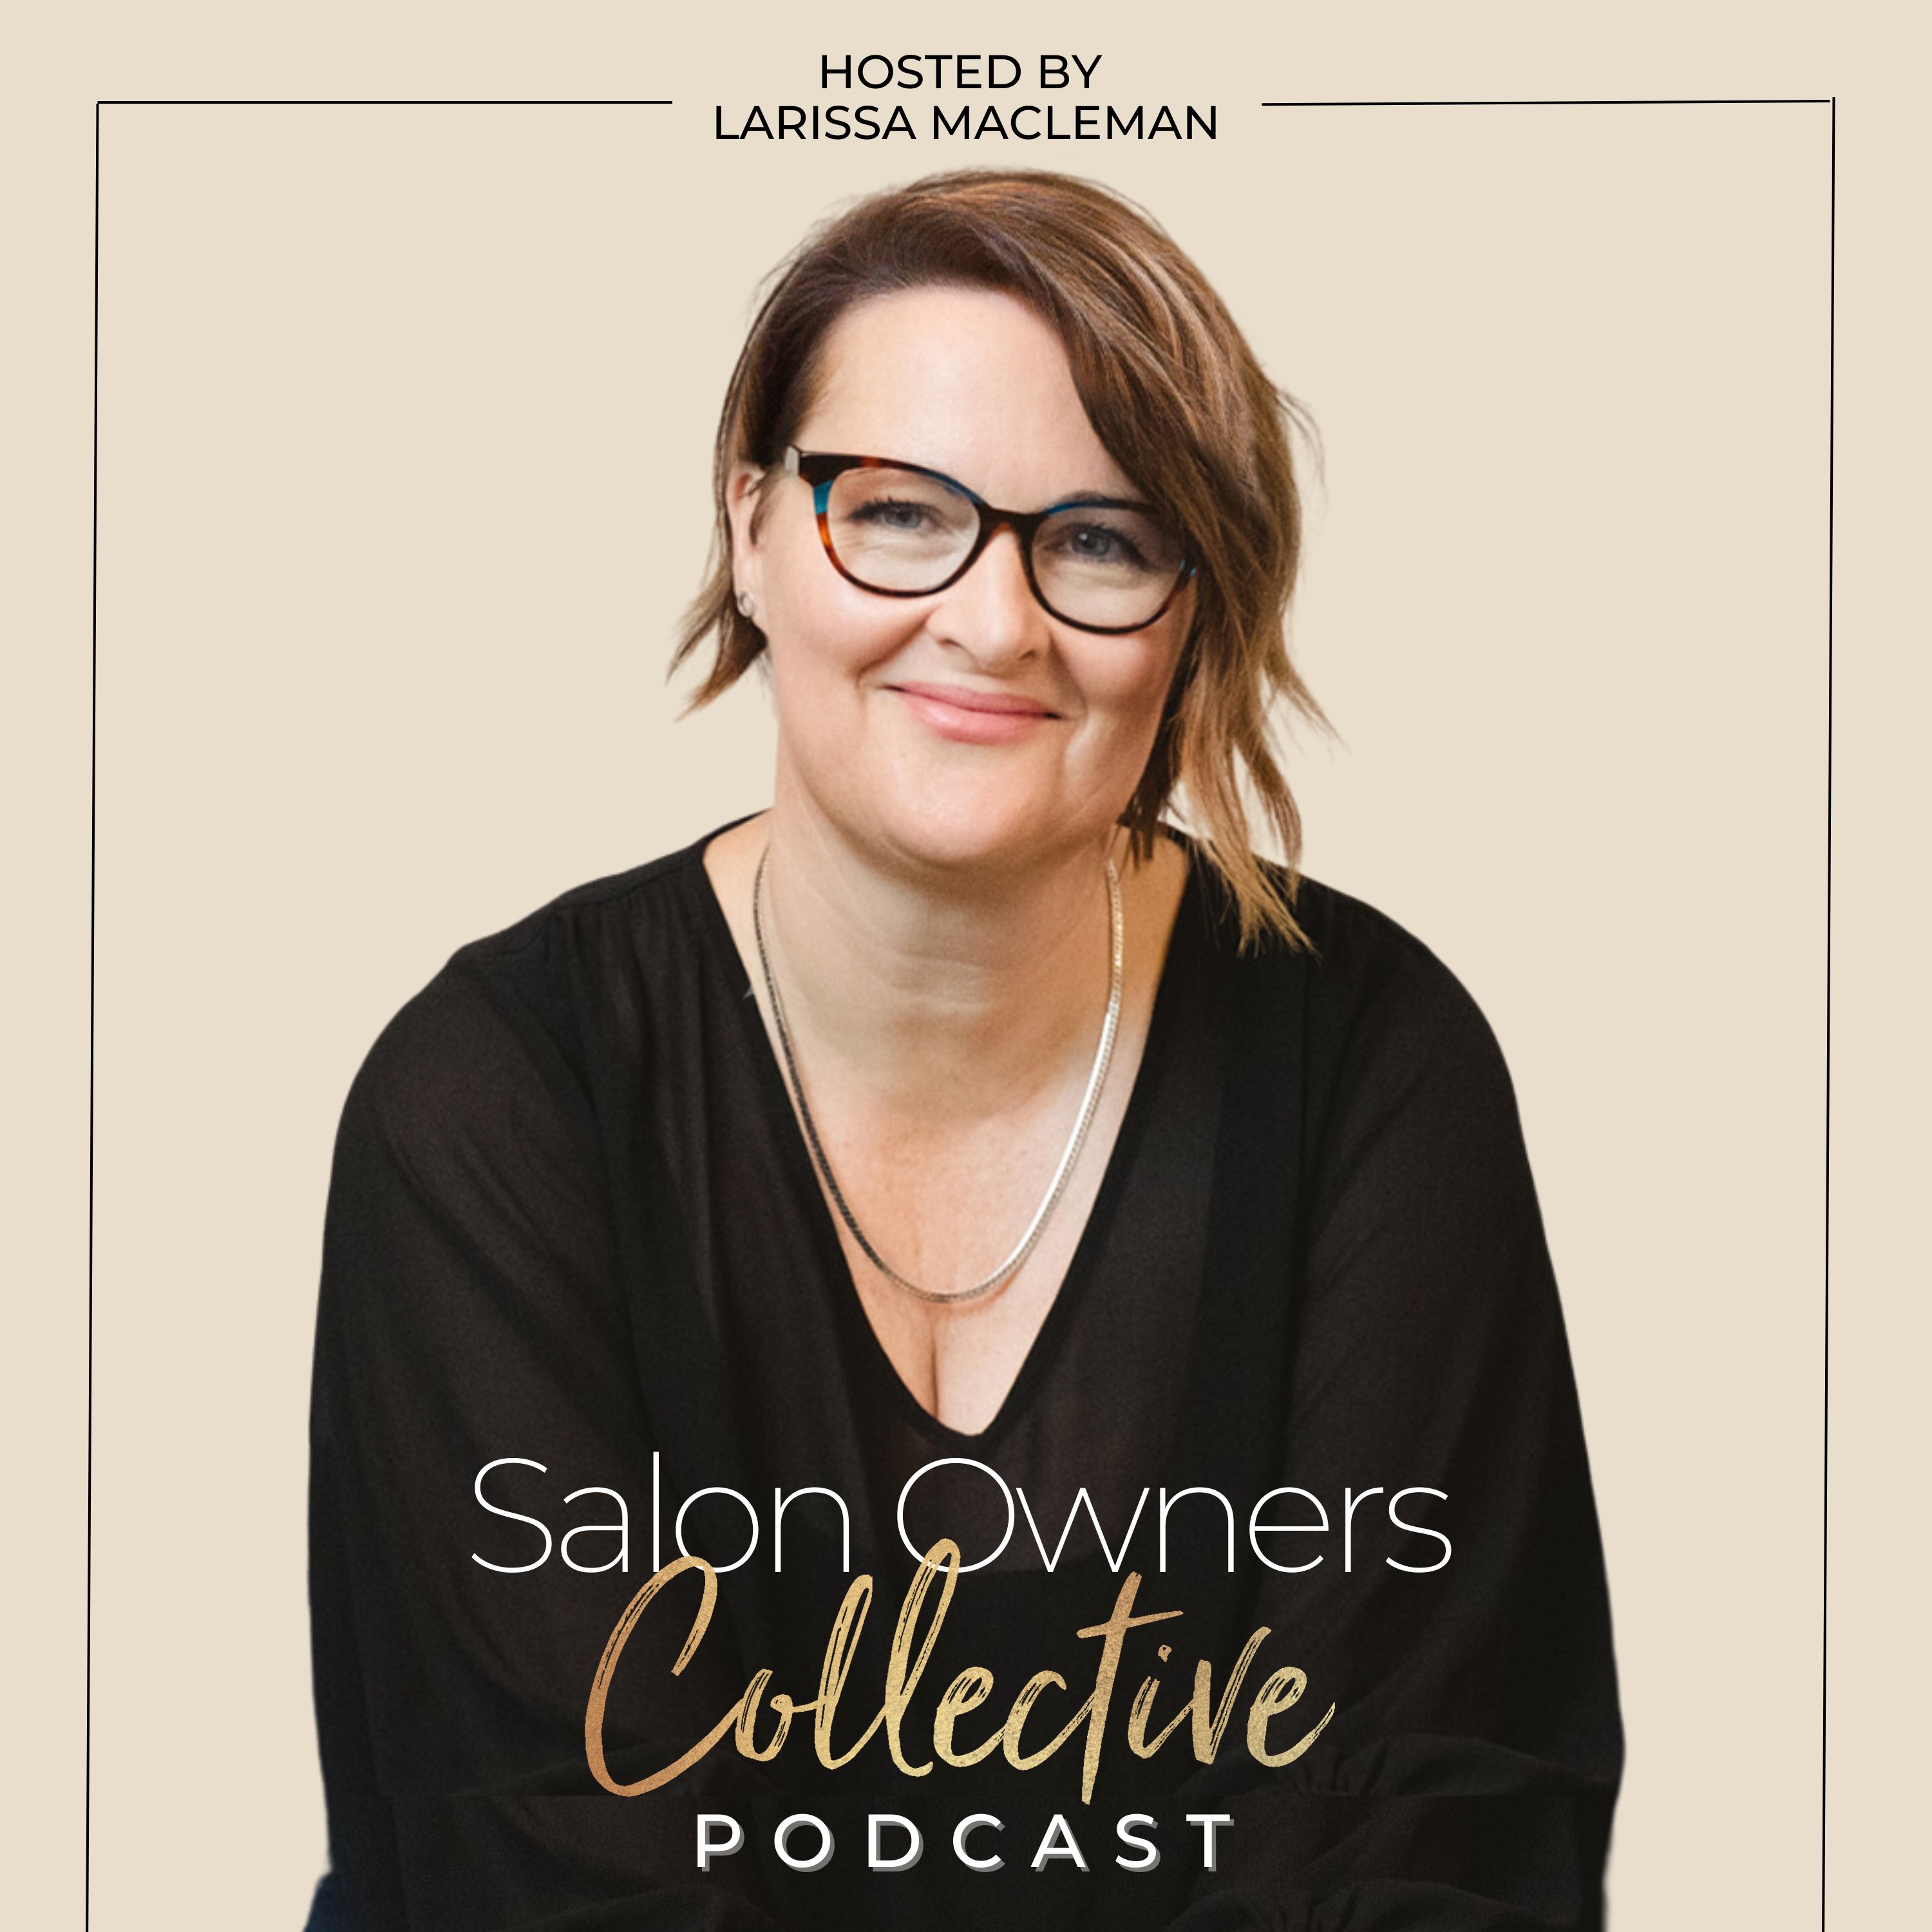 Artwork for podcast Salon Owners Collective